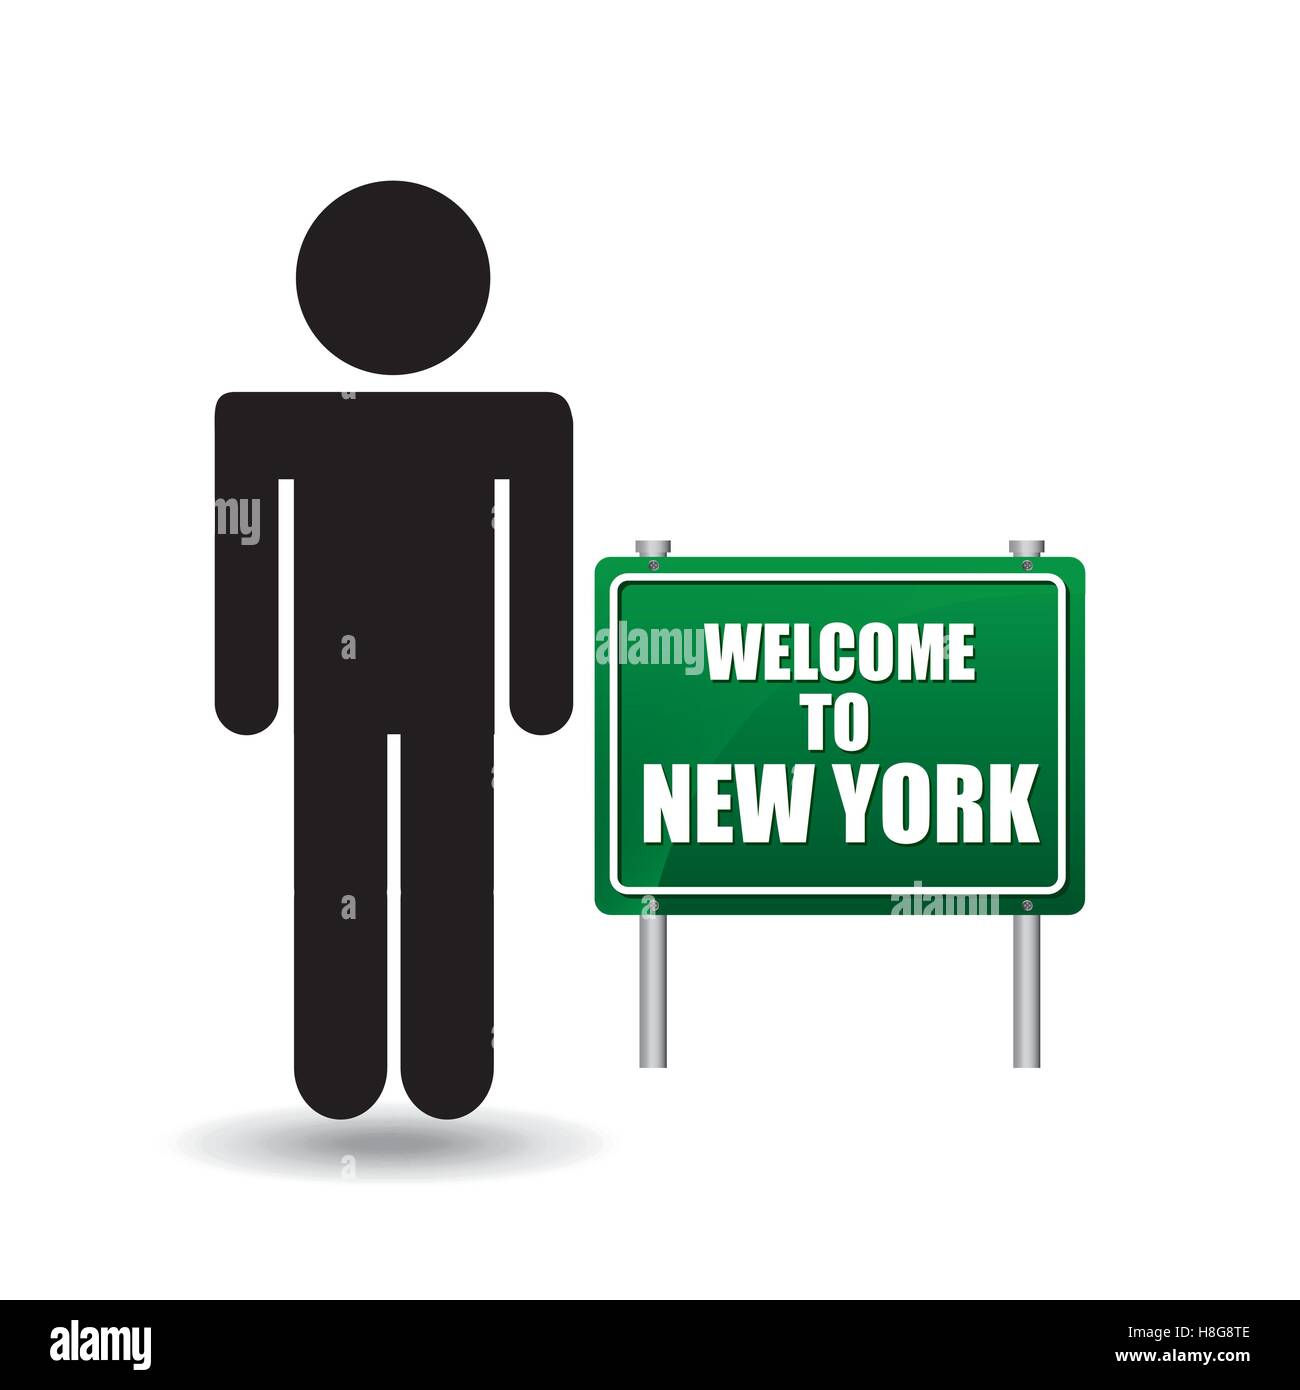 silhouette man sign welcome new york vector illustration eps 10 Stock Vector